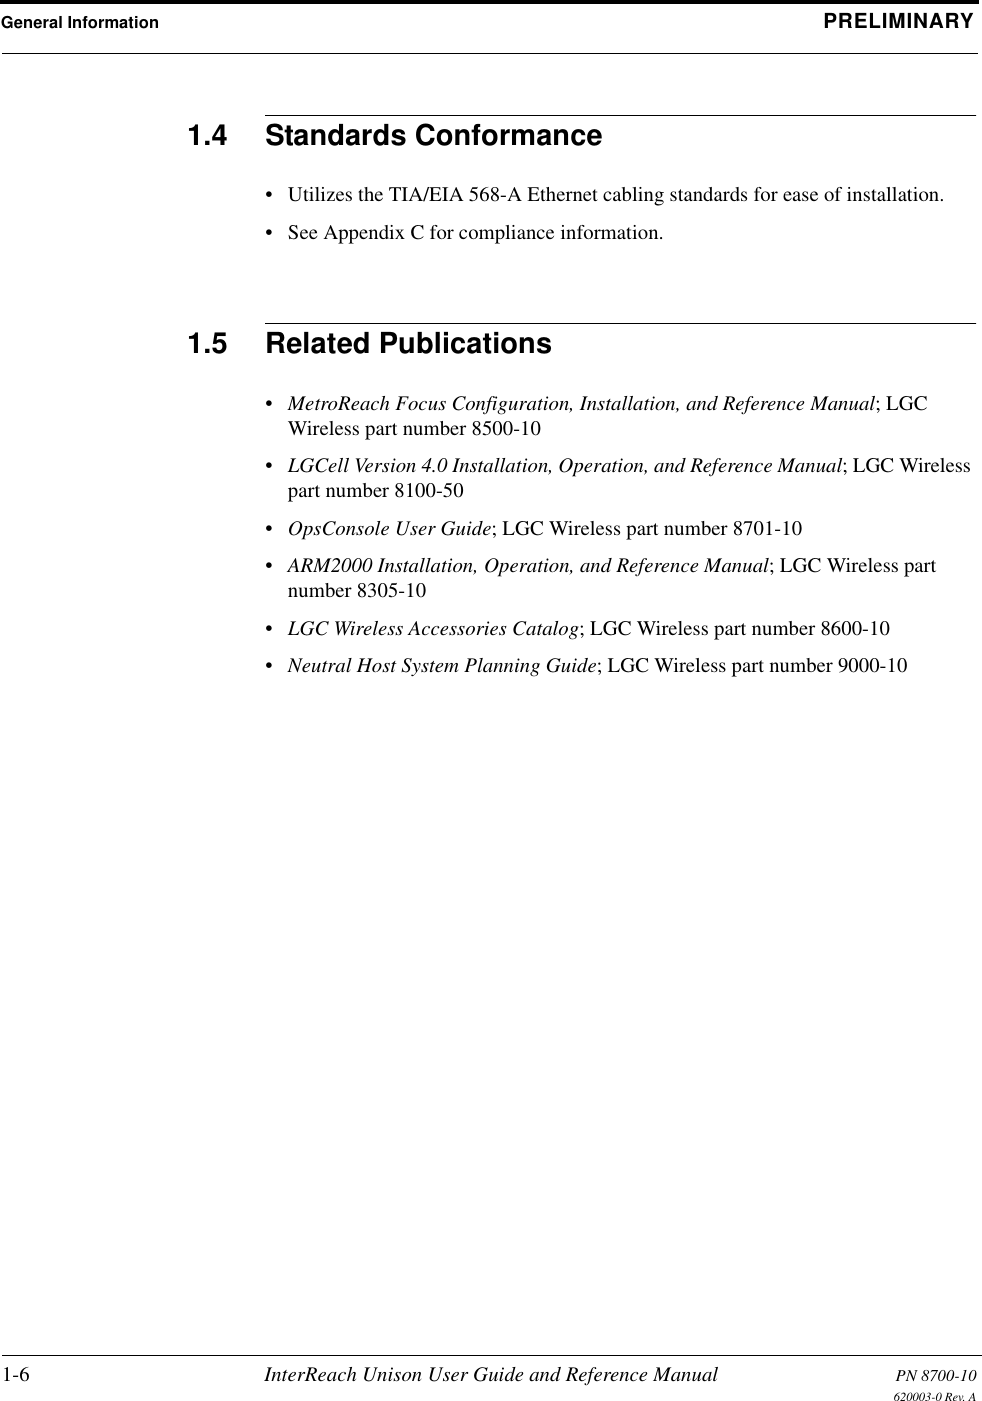 General Information PRELIMINARY1-6 InterReach Unison User Guide and Reference Manual PN 8700-10620003-0 Rev. A1.4 Standards Conformance• Utilizes the TIA/EIA 568-A Ethernet cabling standards for ease of installation.• See Appendix C for compliance information.1.5 Related Publications•MetroReach Focus Configuration, Installation, and Reference Manual; LGC Wireless part number 8500-10•LGCell Version 4.0 Installation, Operation, and Reference Manual; LGC Wireless part number 8100-50•OpsConsole User Guide; LGC Wireless part number 8701-10•ARM2000 Installation, Operation, and Reference Manual; LGC Wireless part number 8305-10•LGC Wireless Accessories Catalog; LGC Wireless part number 8600-10•Neutral Host System Planning Guide; LGC Wireless part number 9000-10